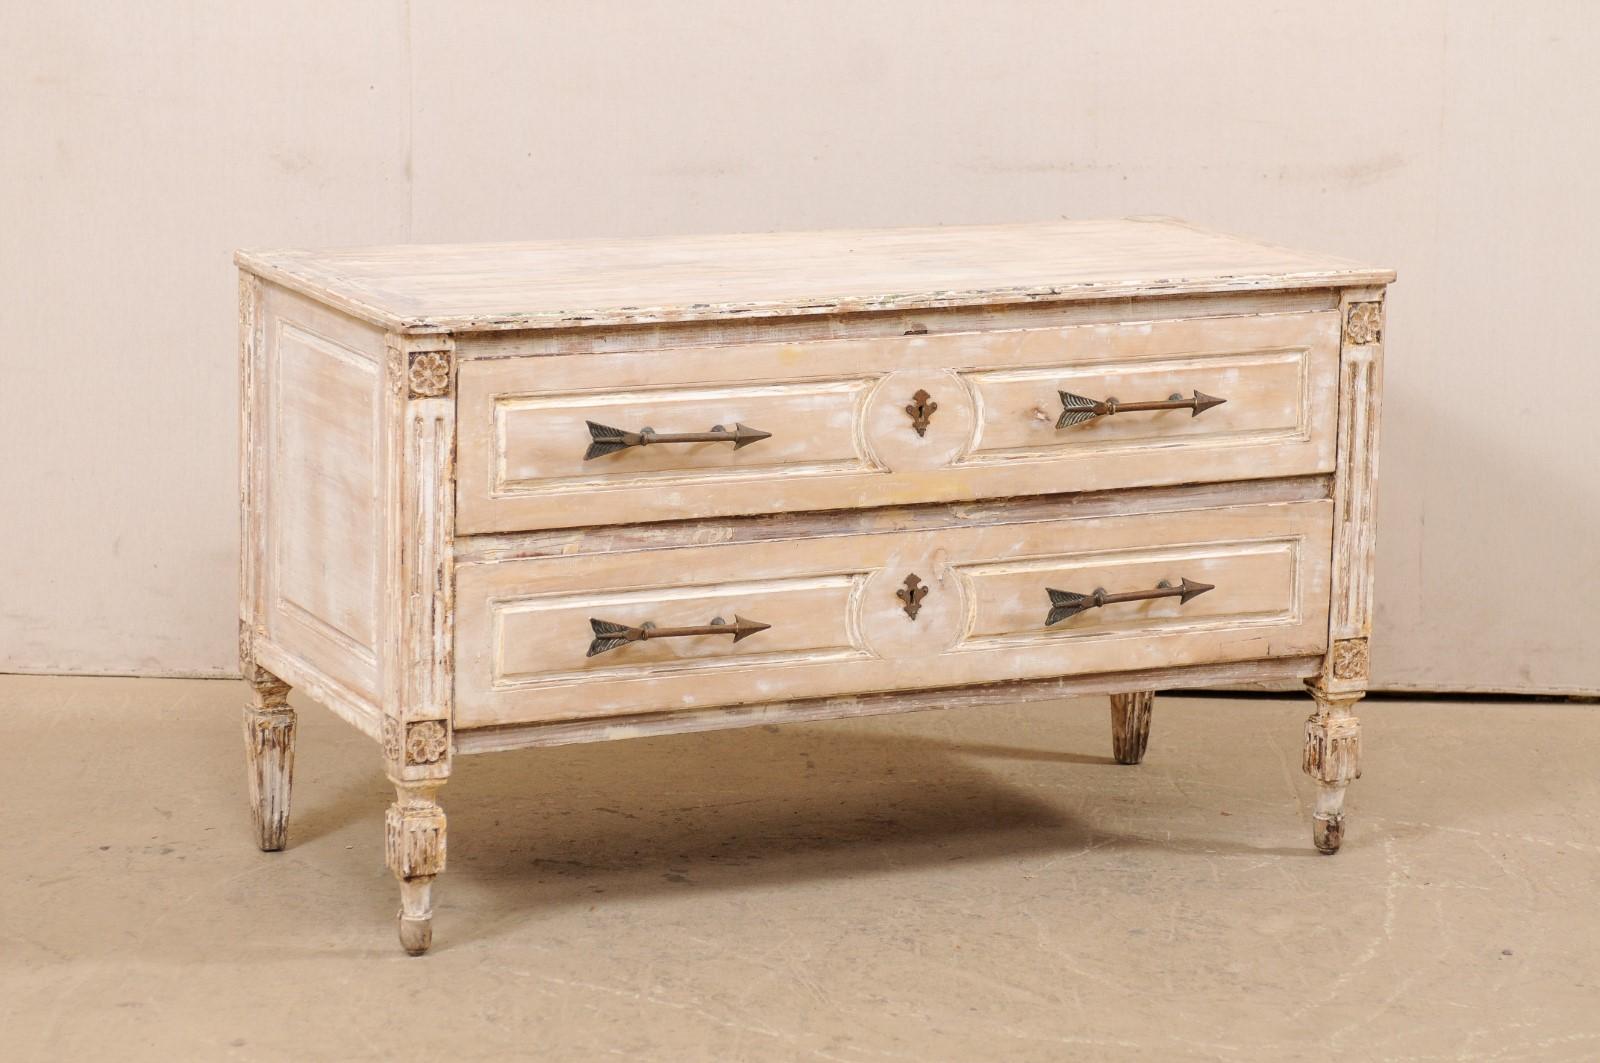 An Italian carved and painted wood raised chest of two drawers from the early 20th century. This antique cassettiera (chest of drawers) from Italy features a rectangular-shaped top, over a nicely decorated case which houses two full-sized